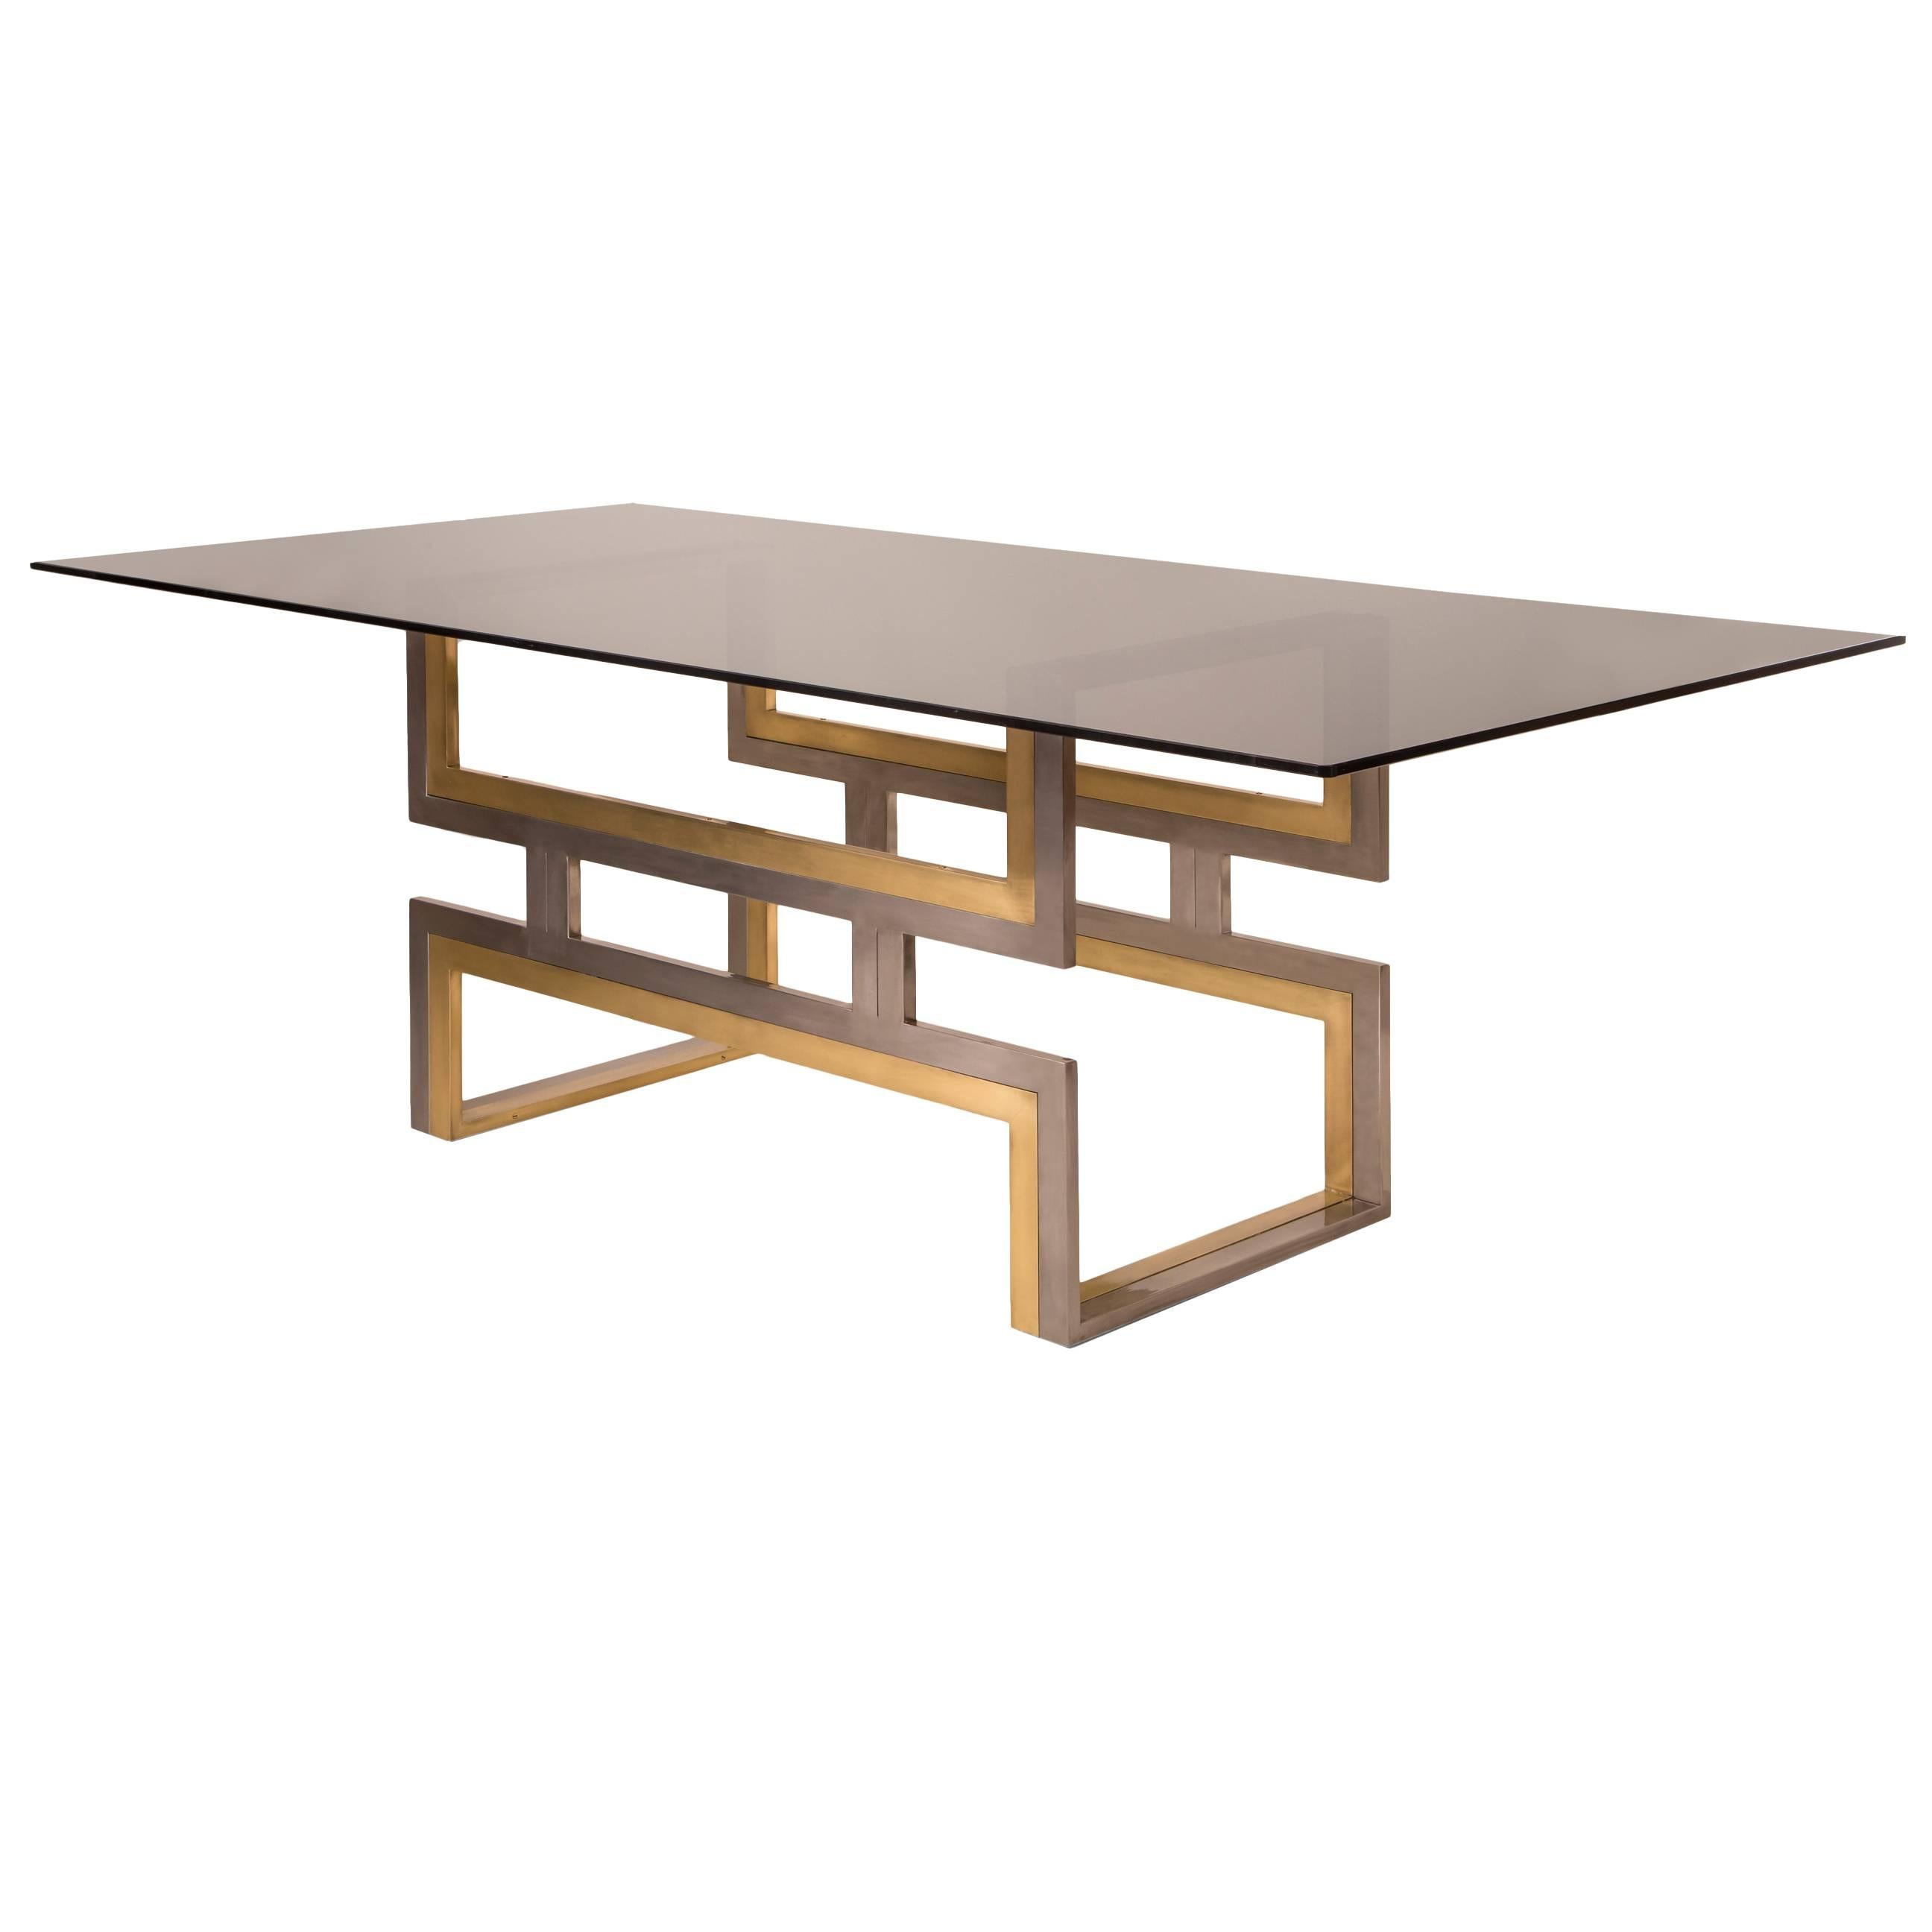 Romeo Rega, Exceptional Italian Chrome and Brass Dining / Center Table For Sale